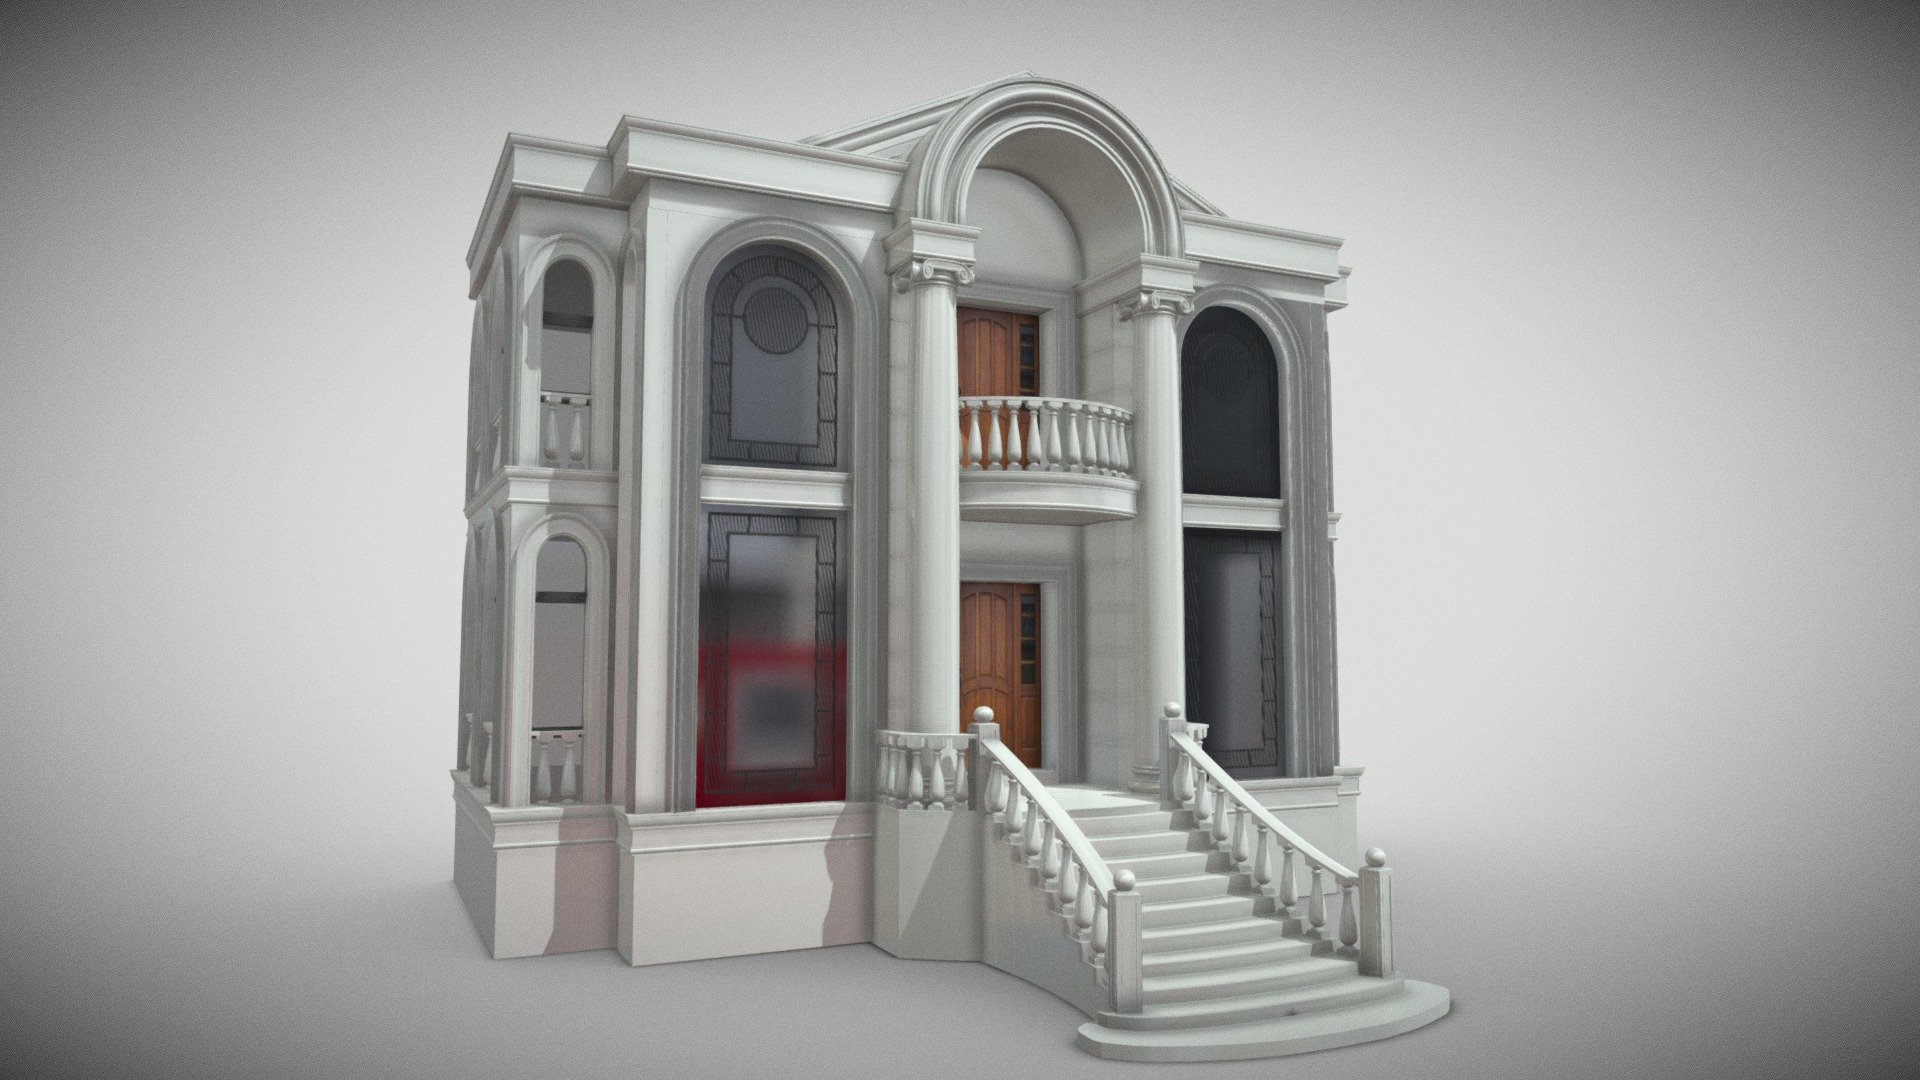 Classical Building 03 can be an impressive element for your projects.
low polygon, easy to use, fast rendering, realistic image 3d model